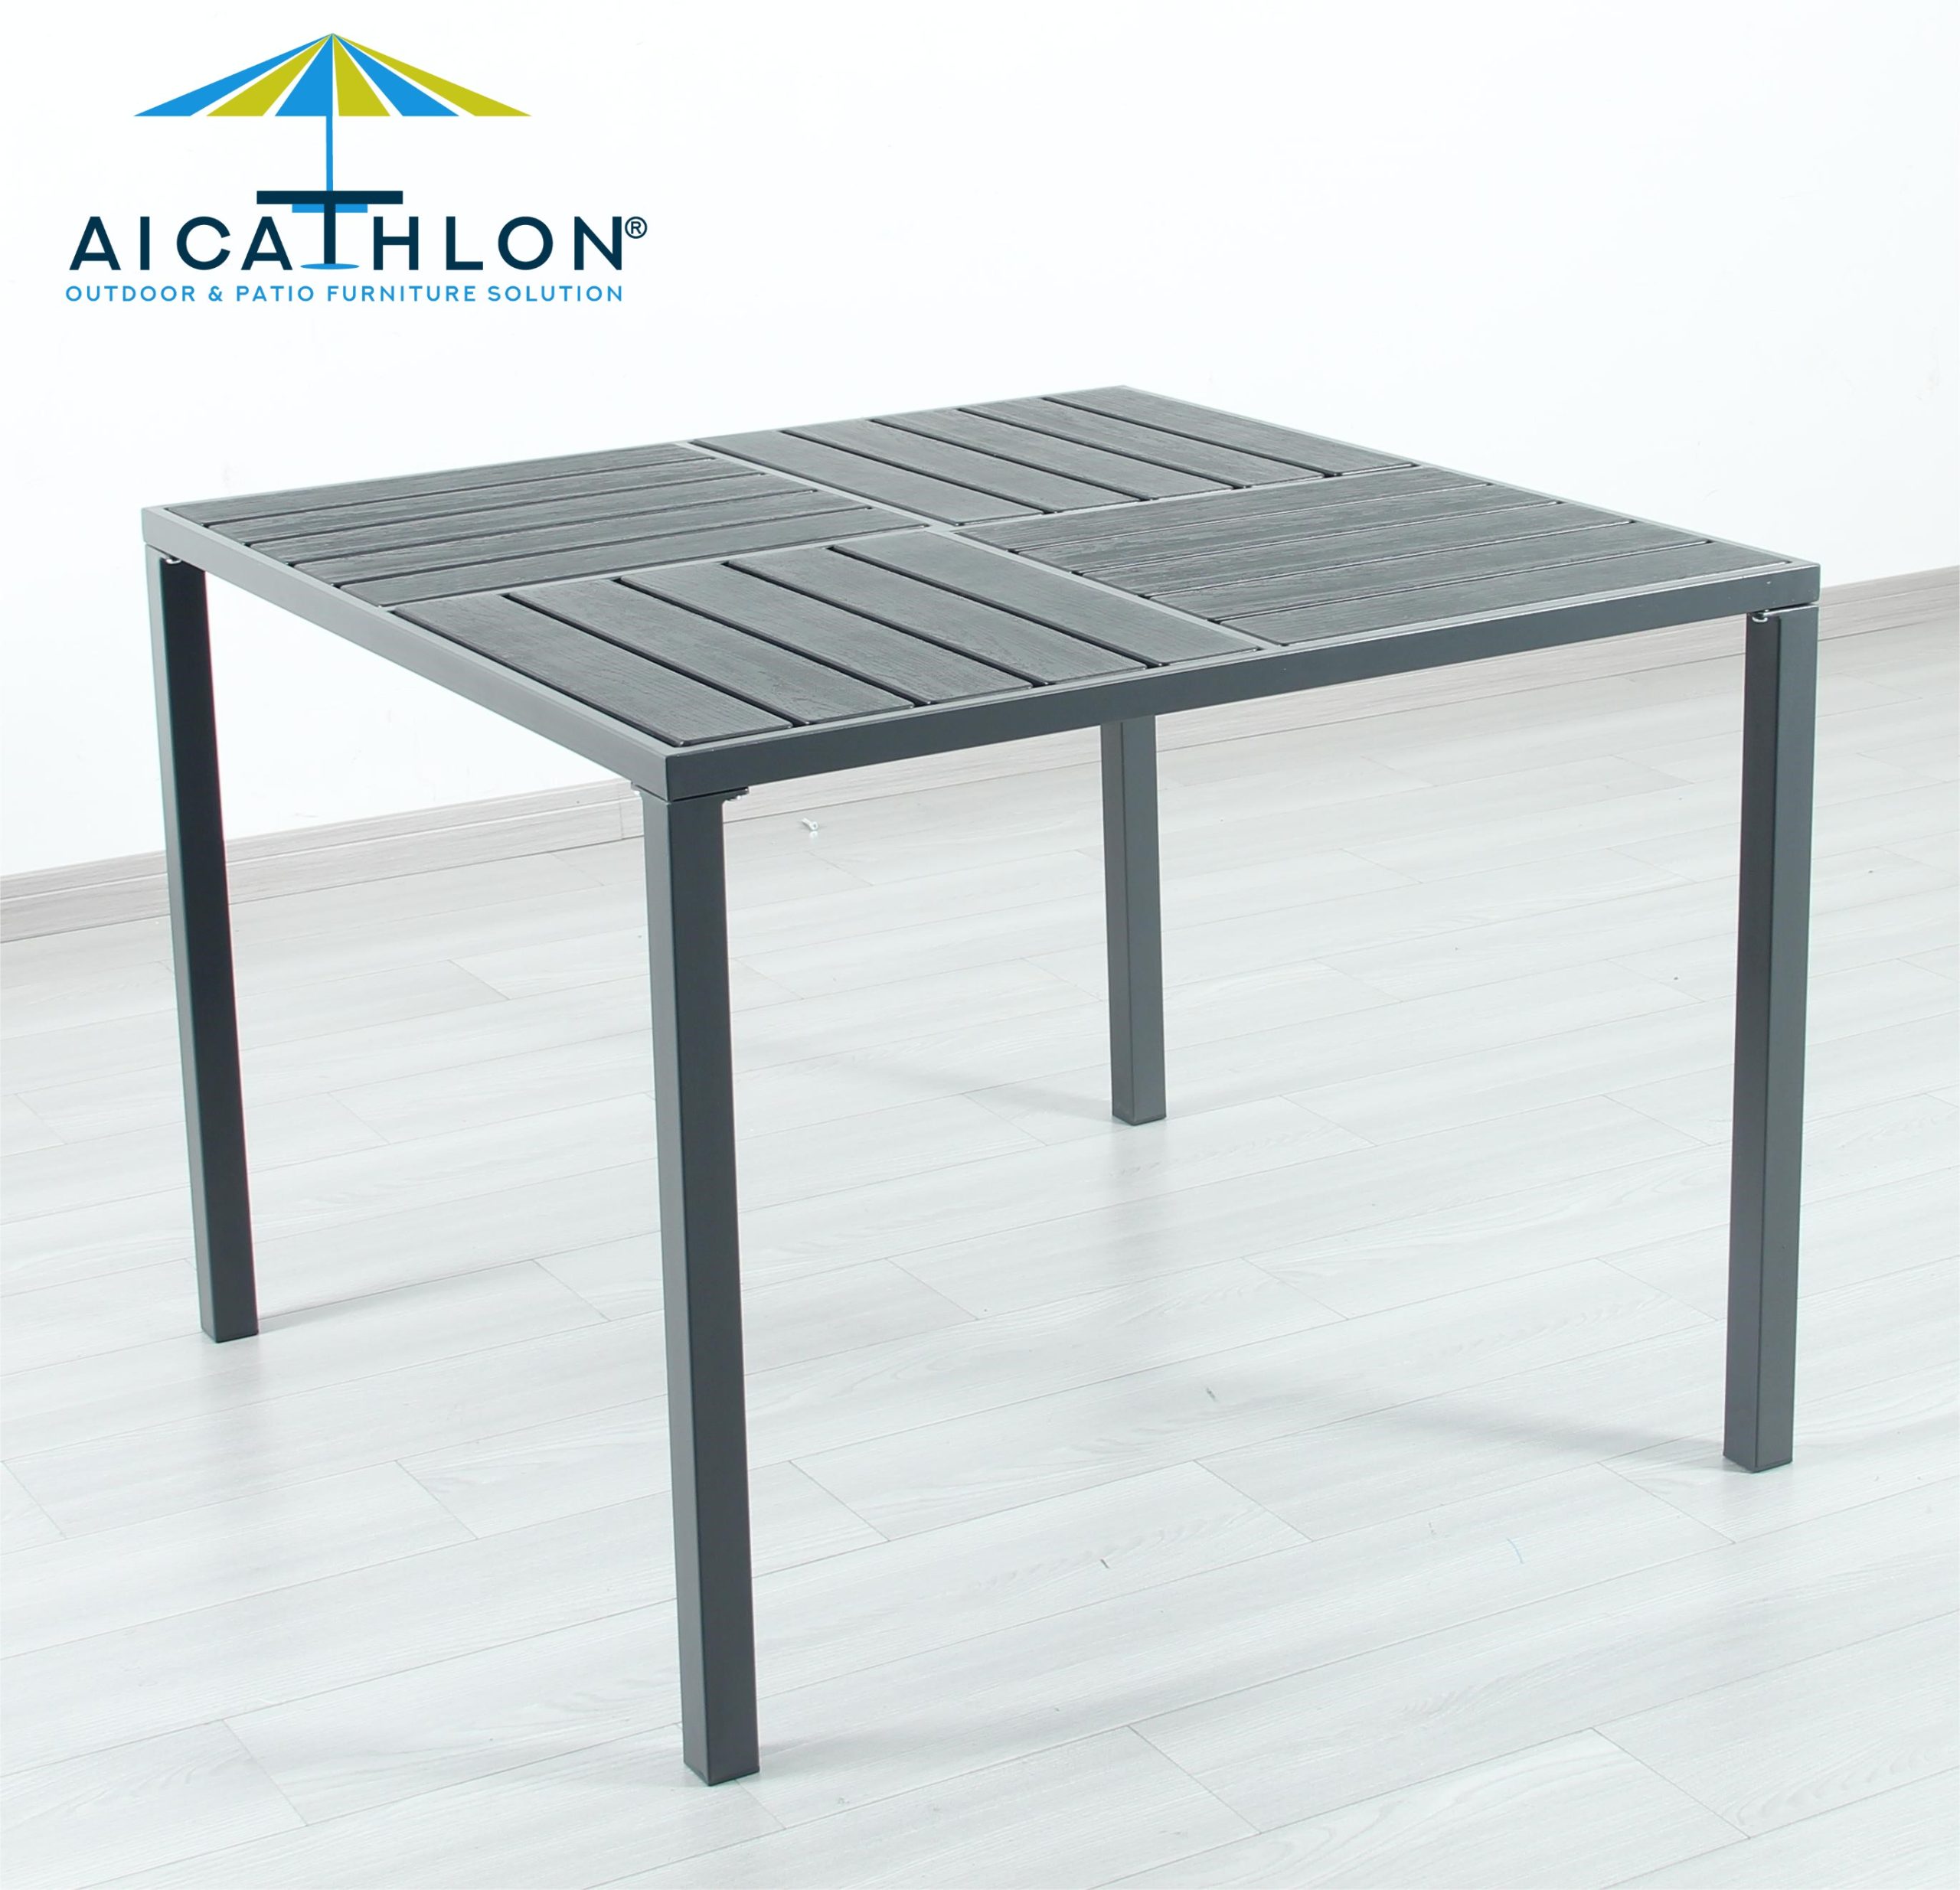 Top selling products outdoor furniture patio black plastic Steel Square dining table and chairs